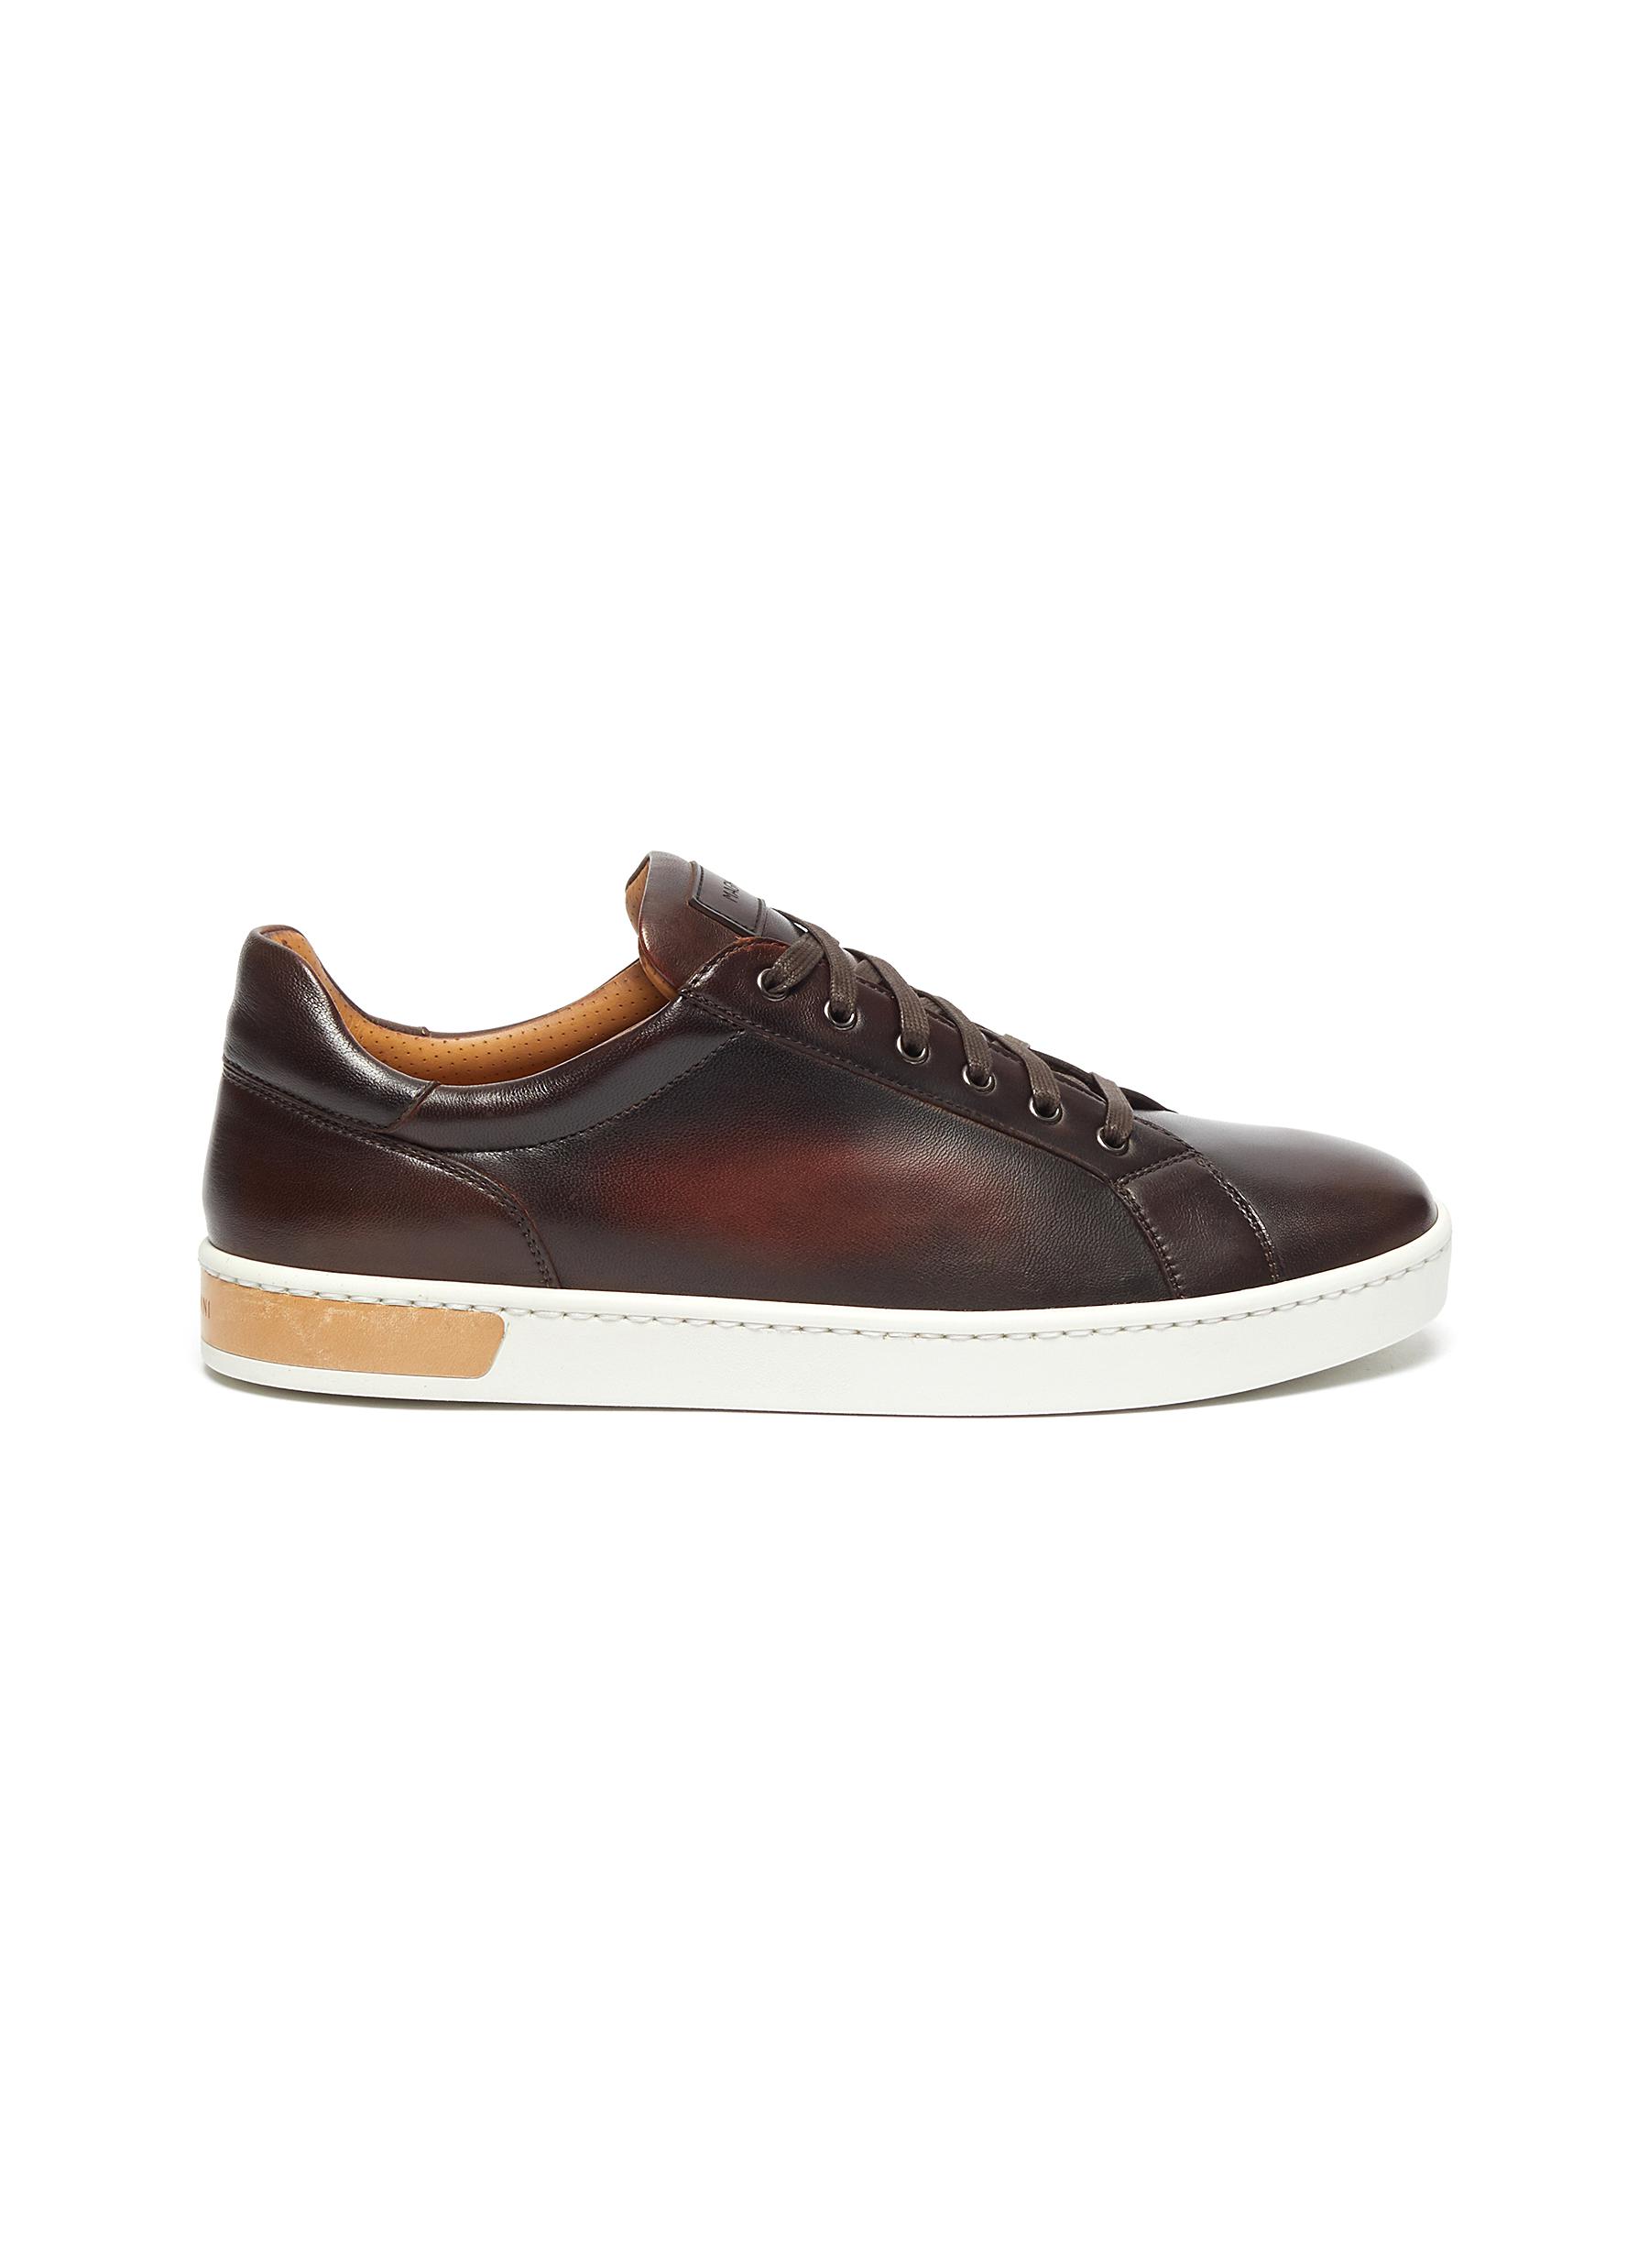 Magnanni Leather Sneakers | ModeSens